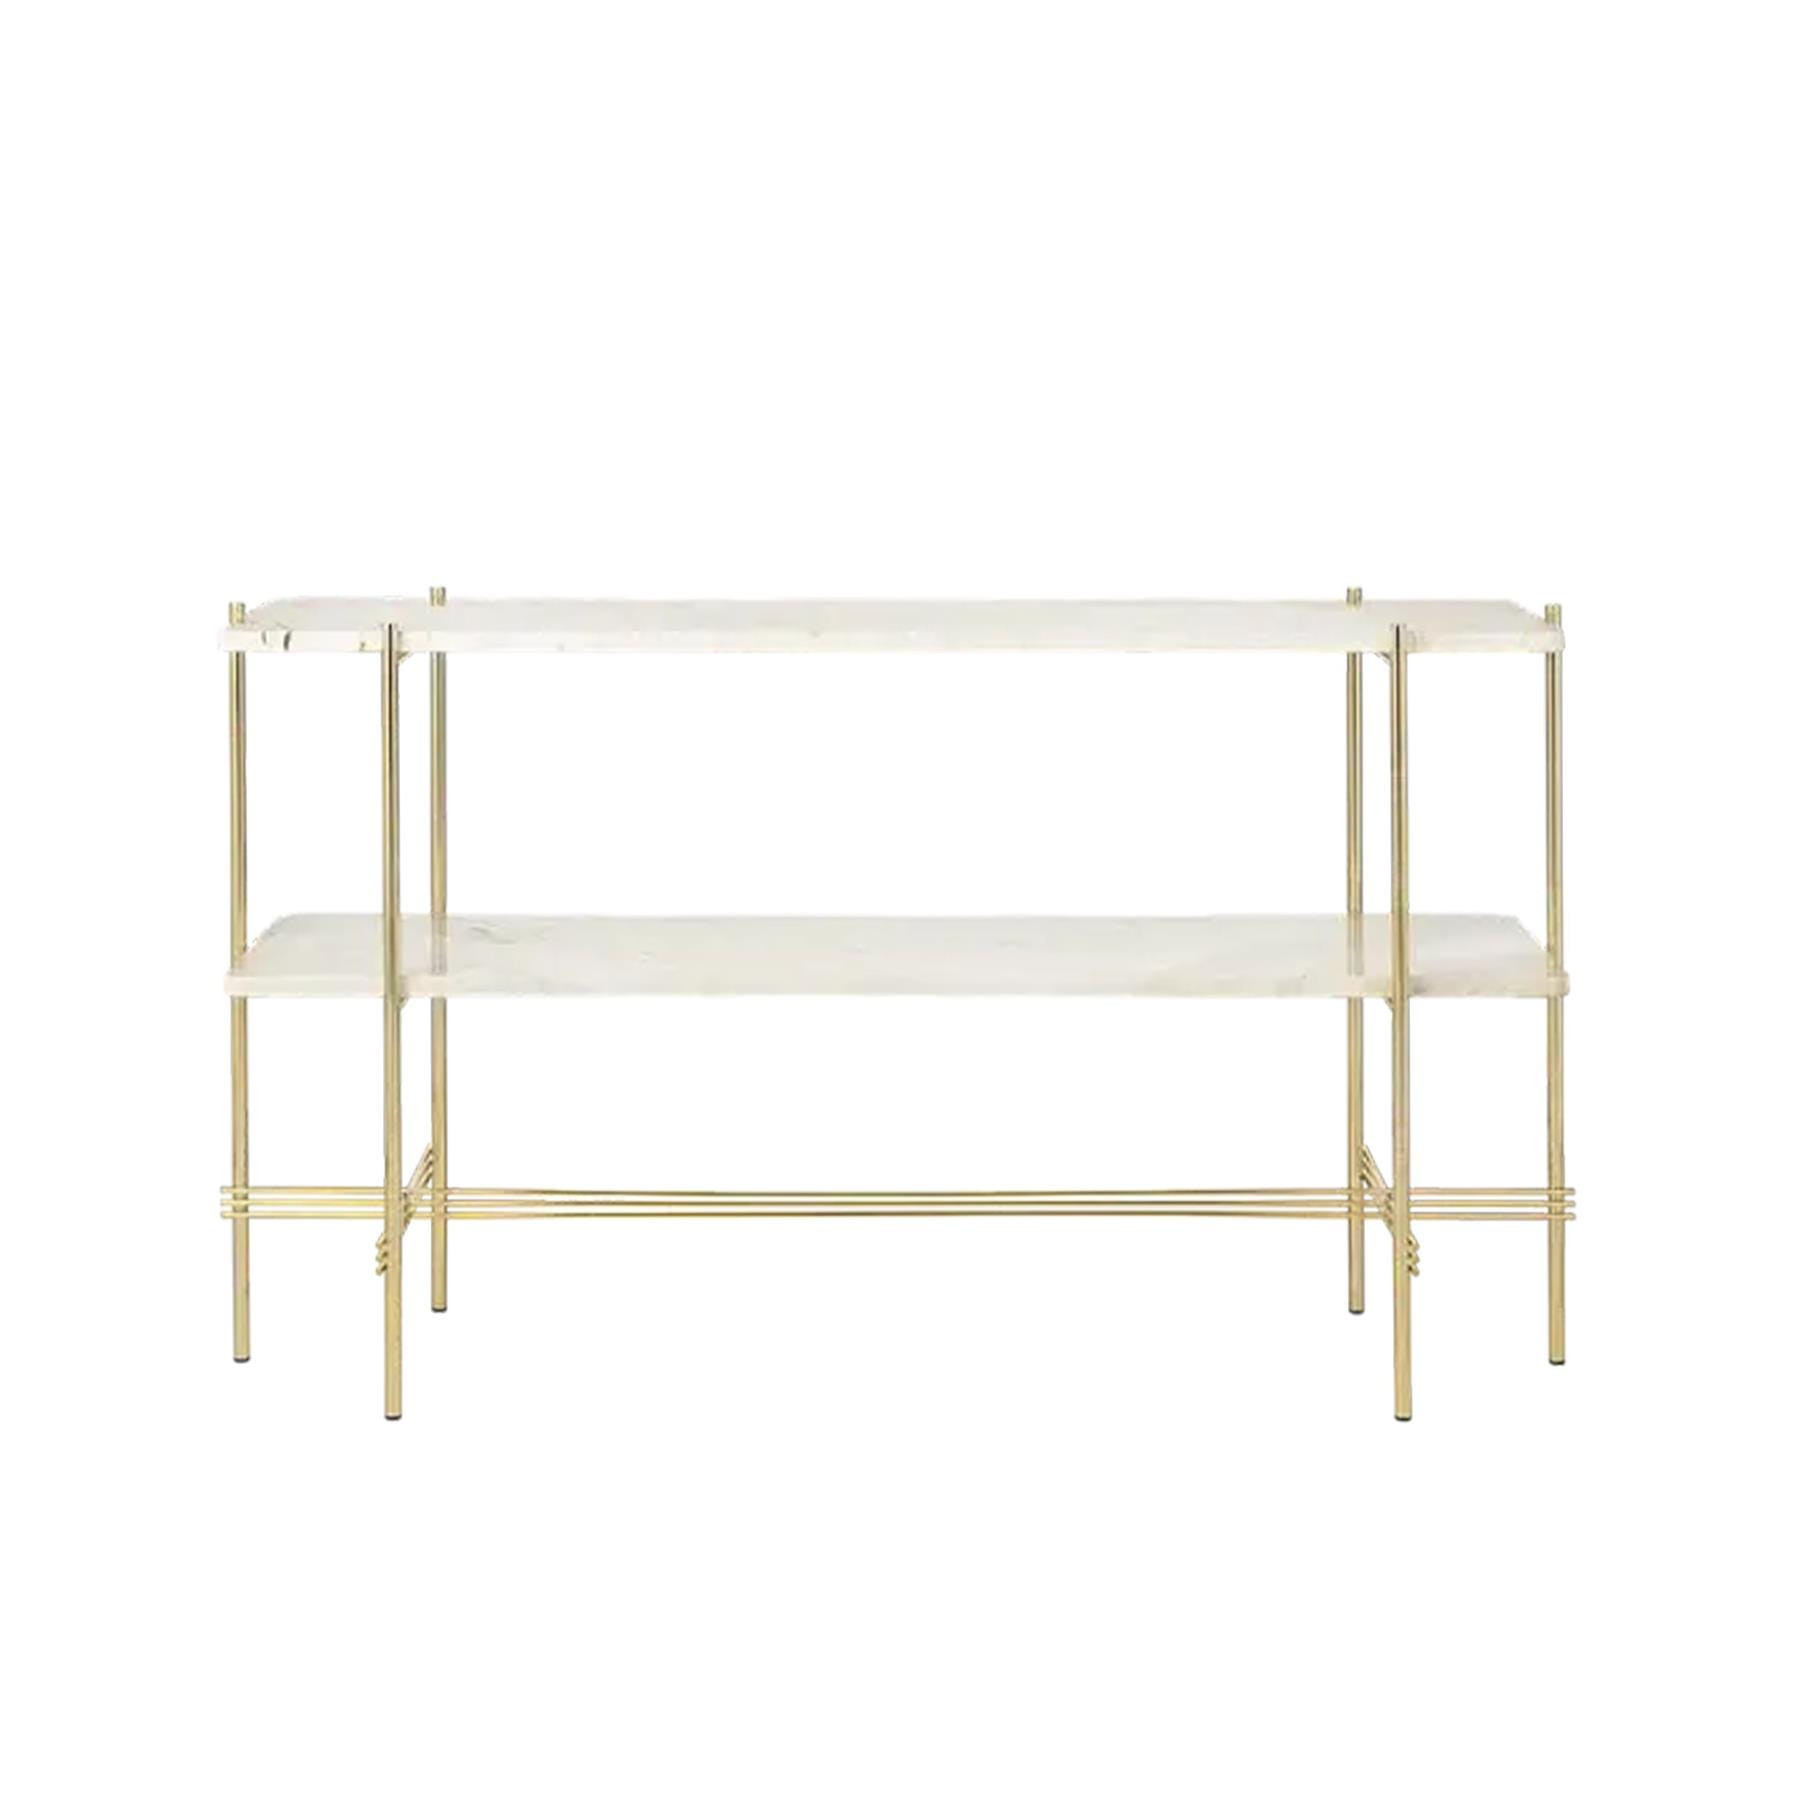 Ts Console Table Brass Frame 2 Shelves Travertinewhite